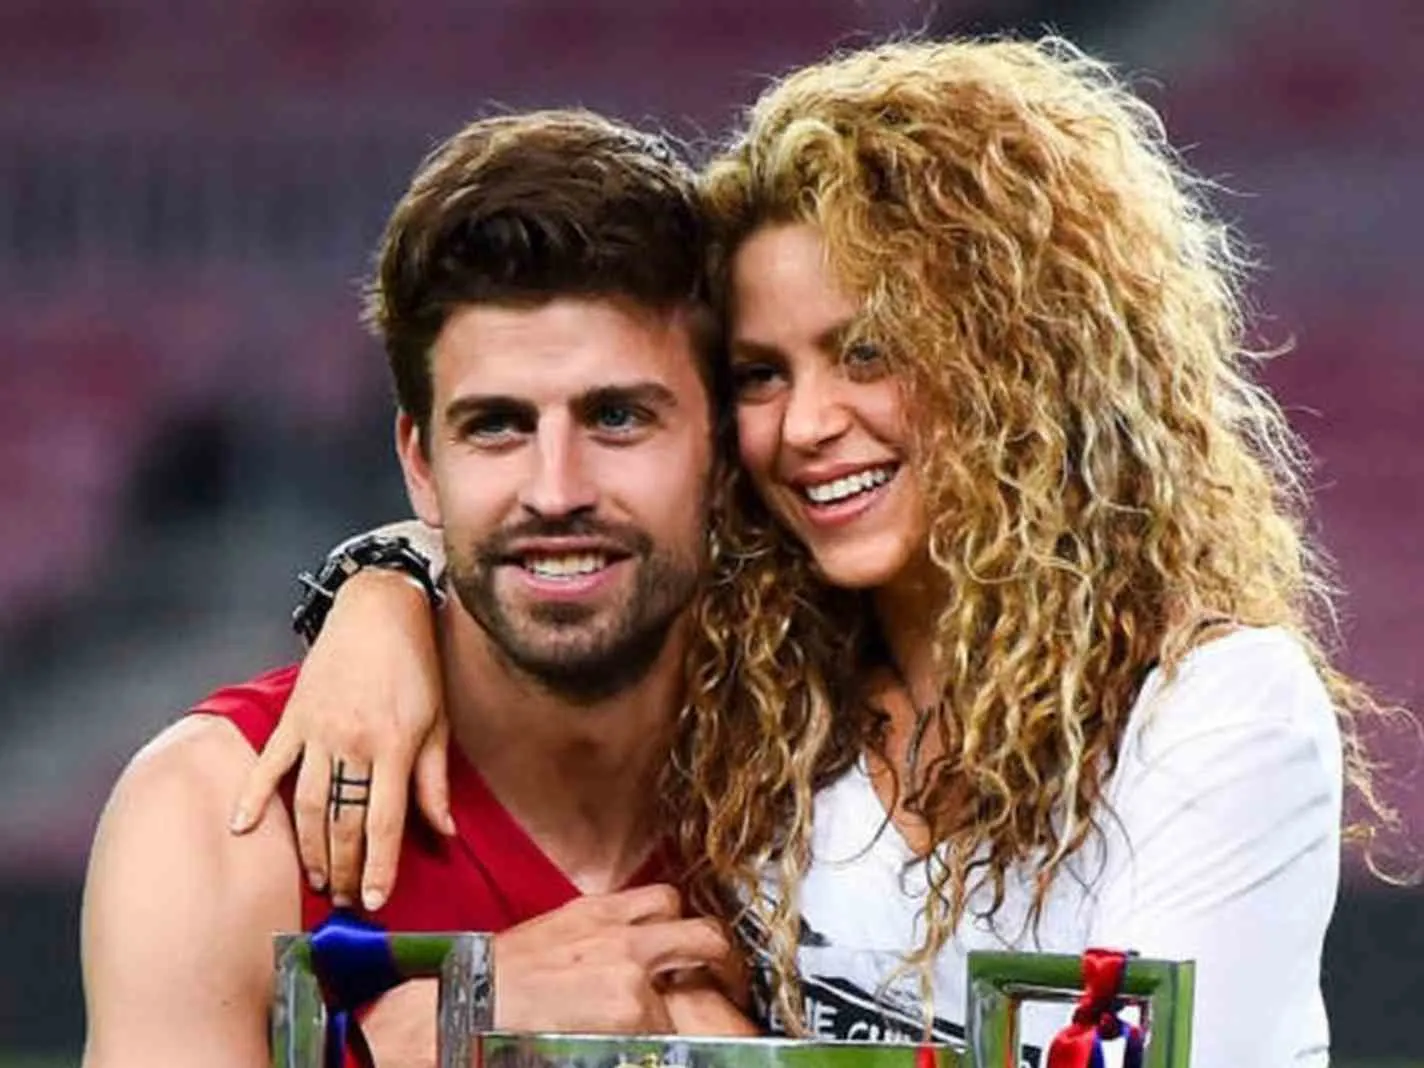 Gerard Pique and Shakira in happier times.